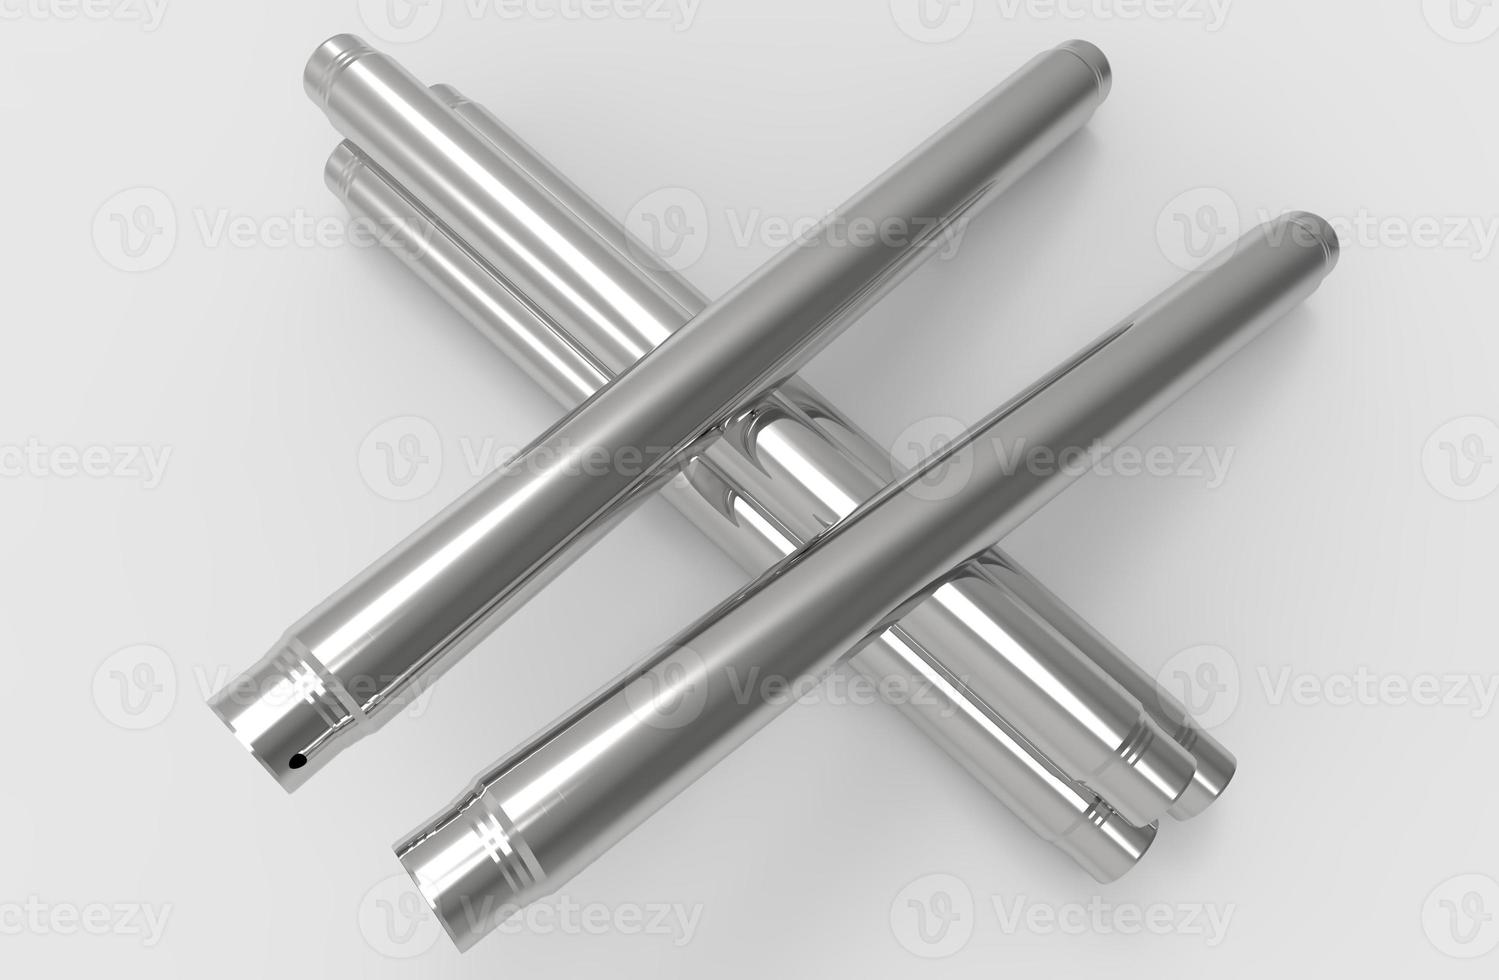 oil plastic metal stream cylinder pipe background texture 3d illustration rendering photo